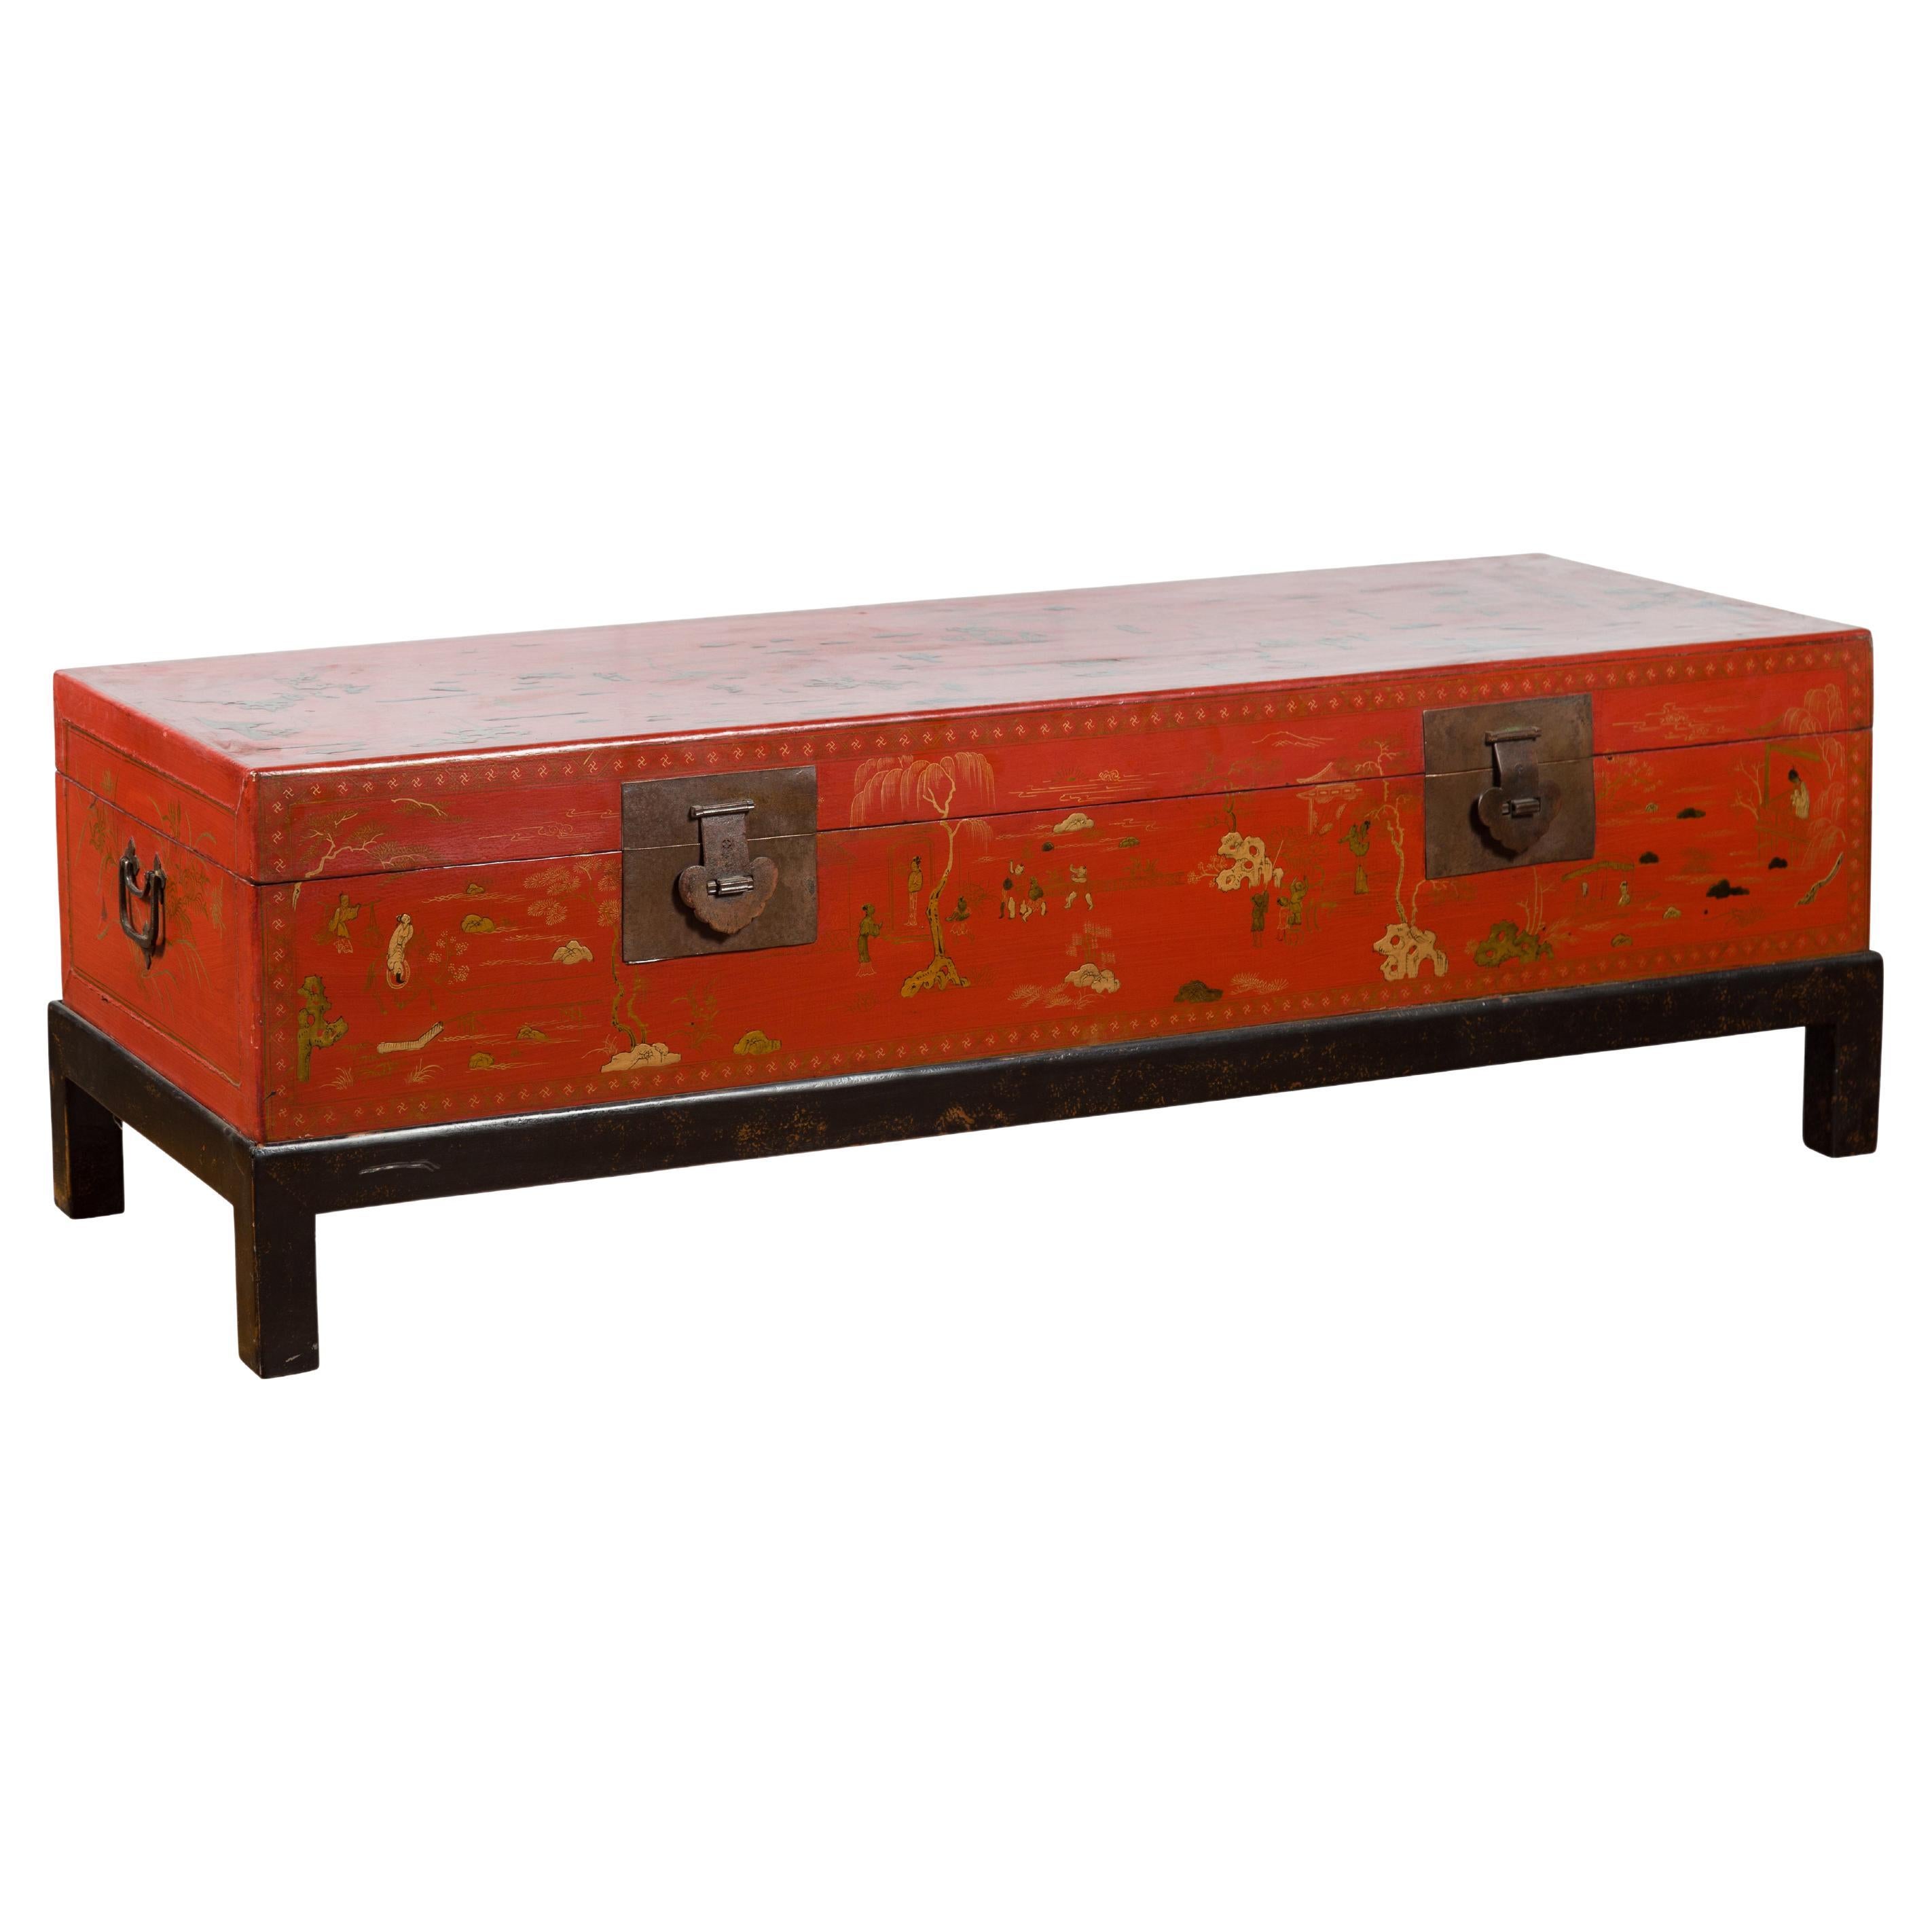 Chinese Vintage Red Lacquered Trunk on Black Base with Gilded Chinoiserie Décor